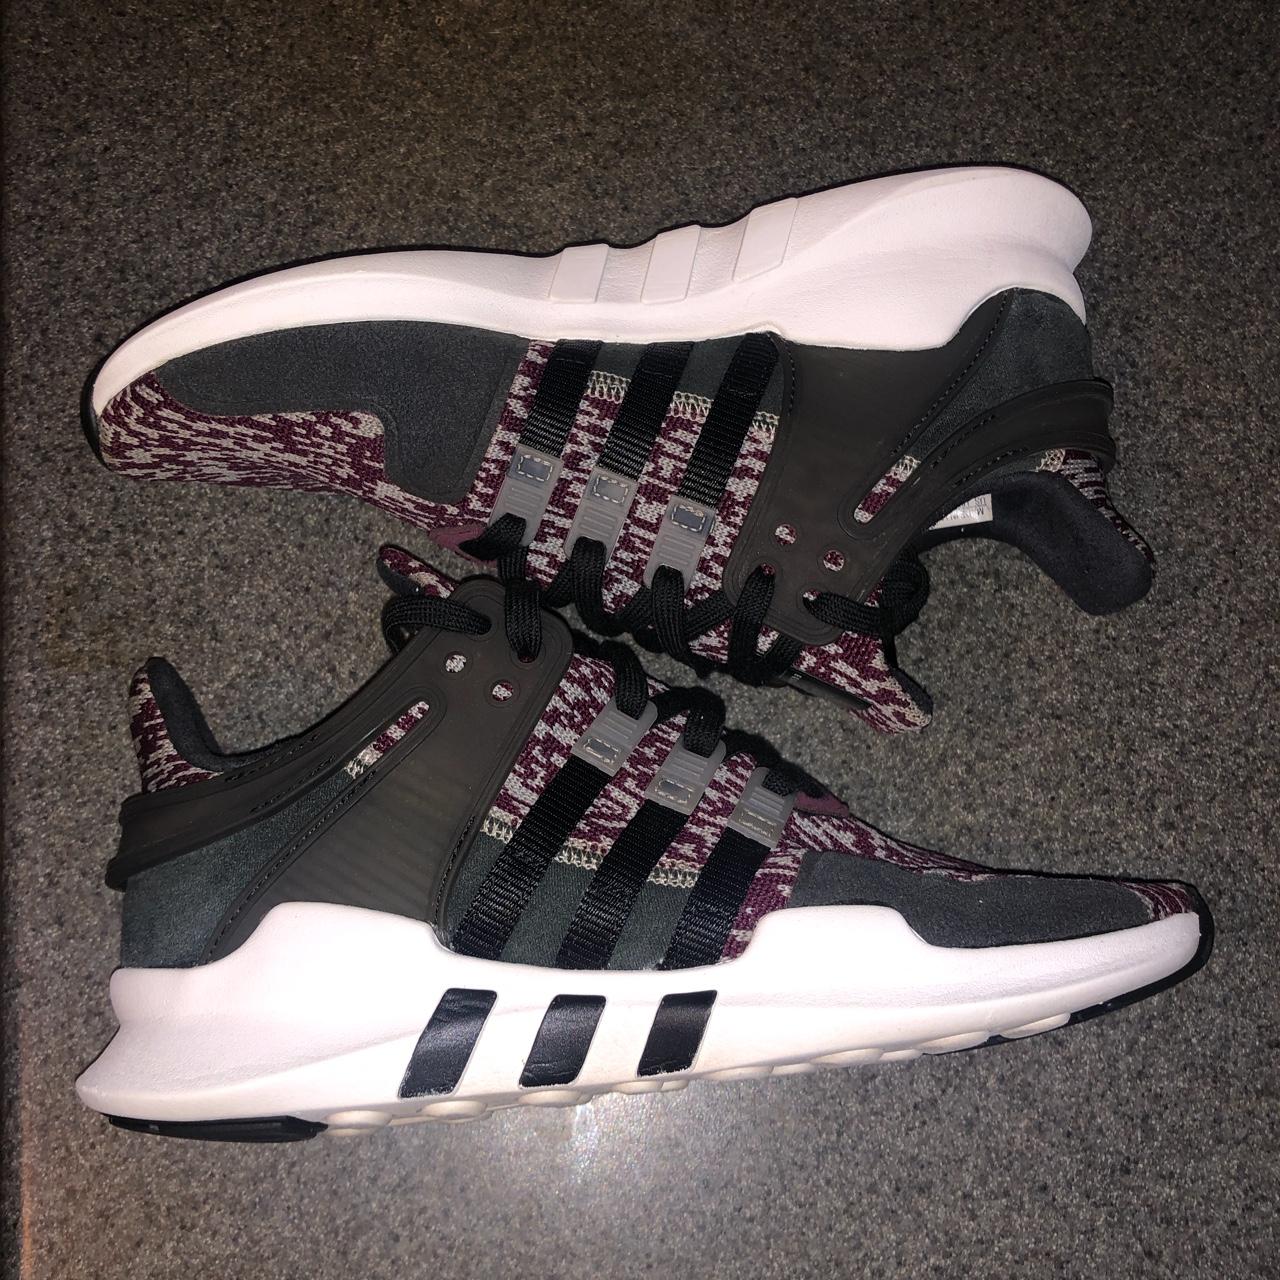 Adidas Women's Burgundy and Grey Trainers - 2